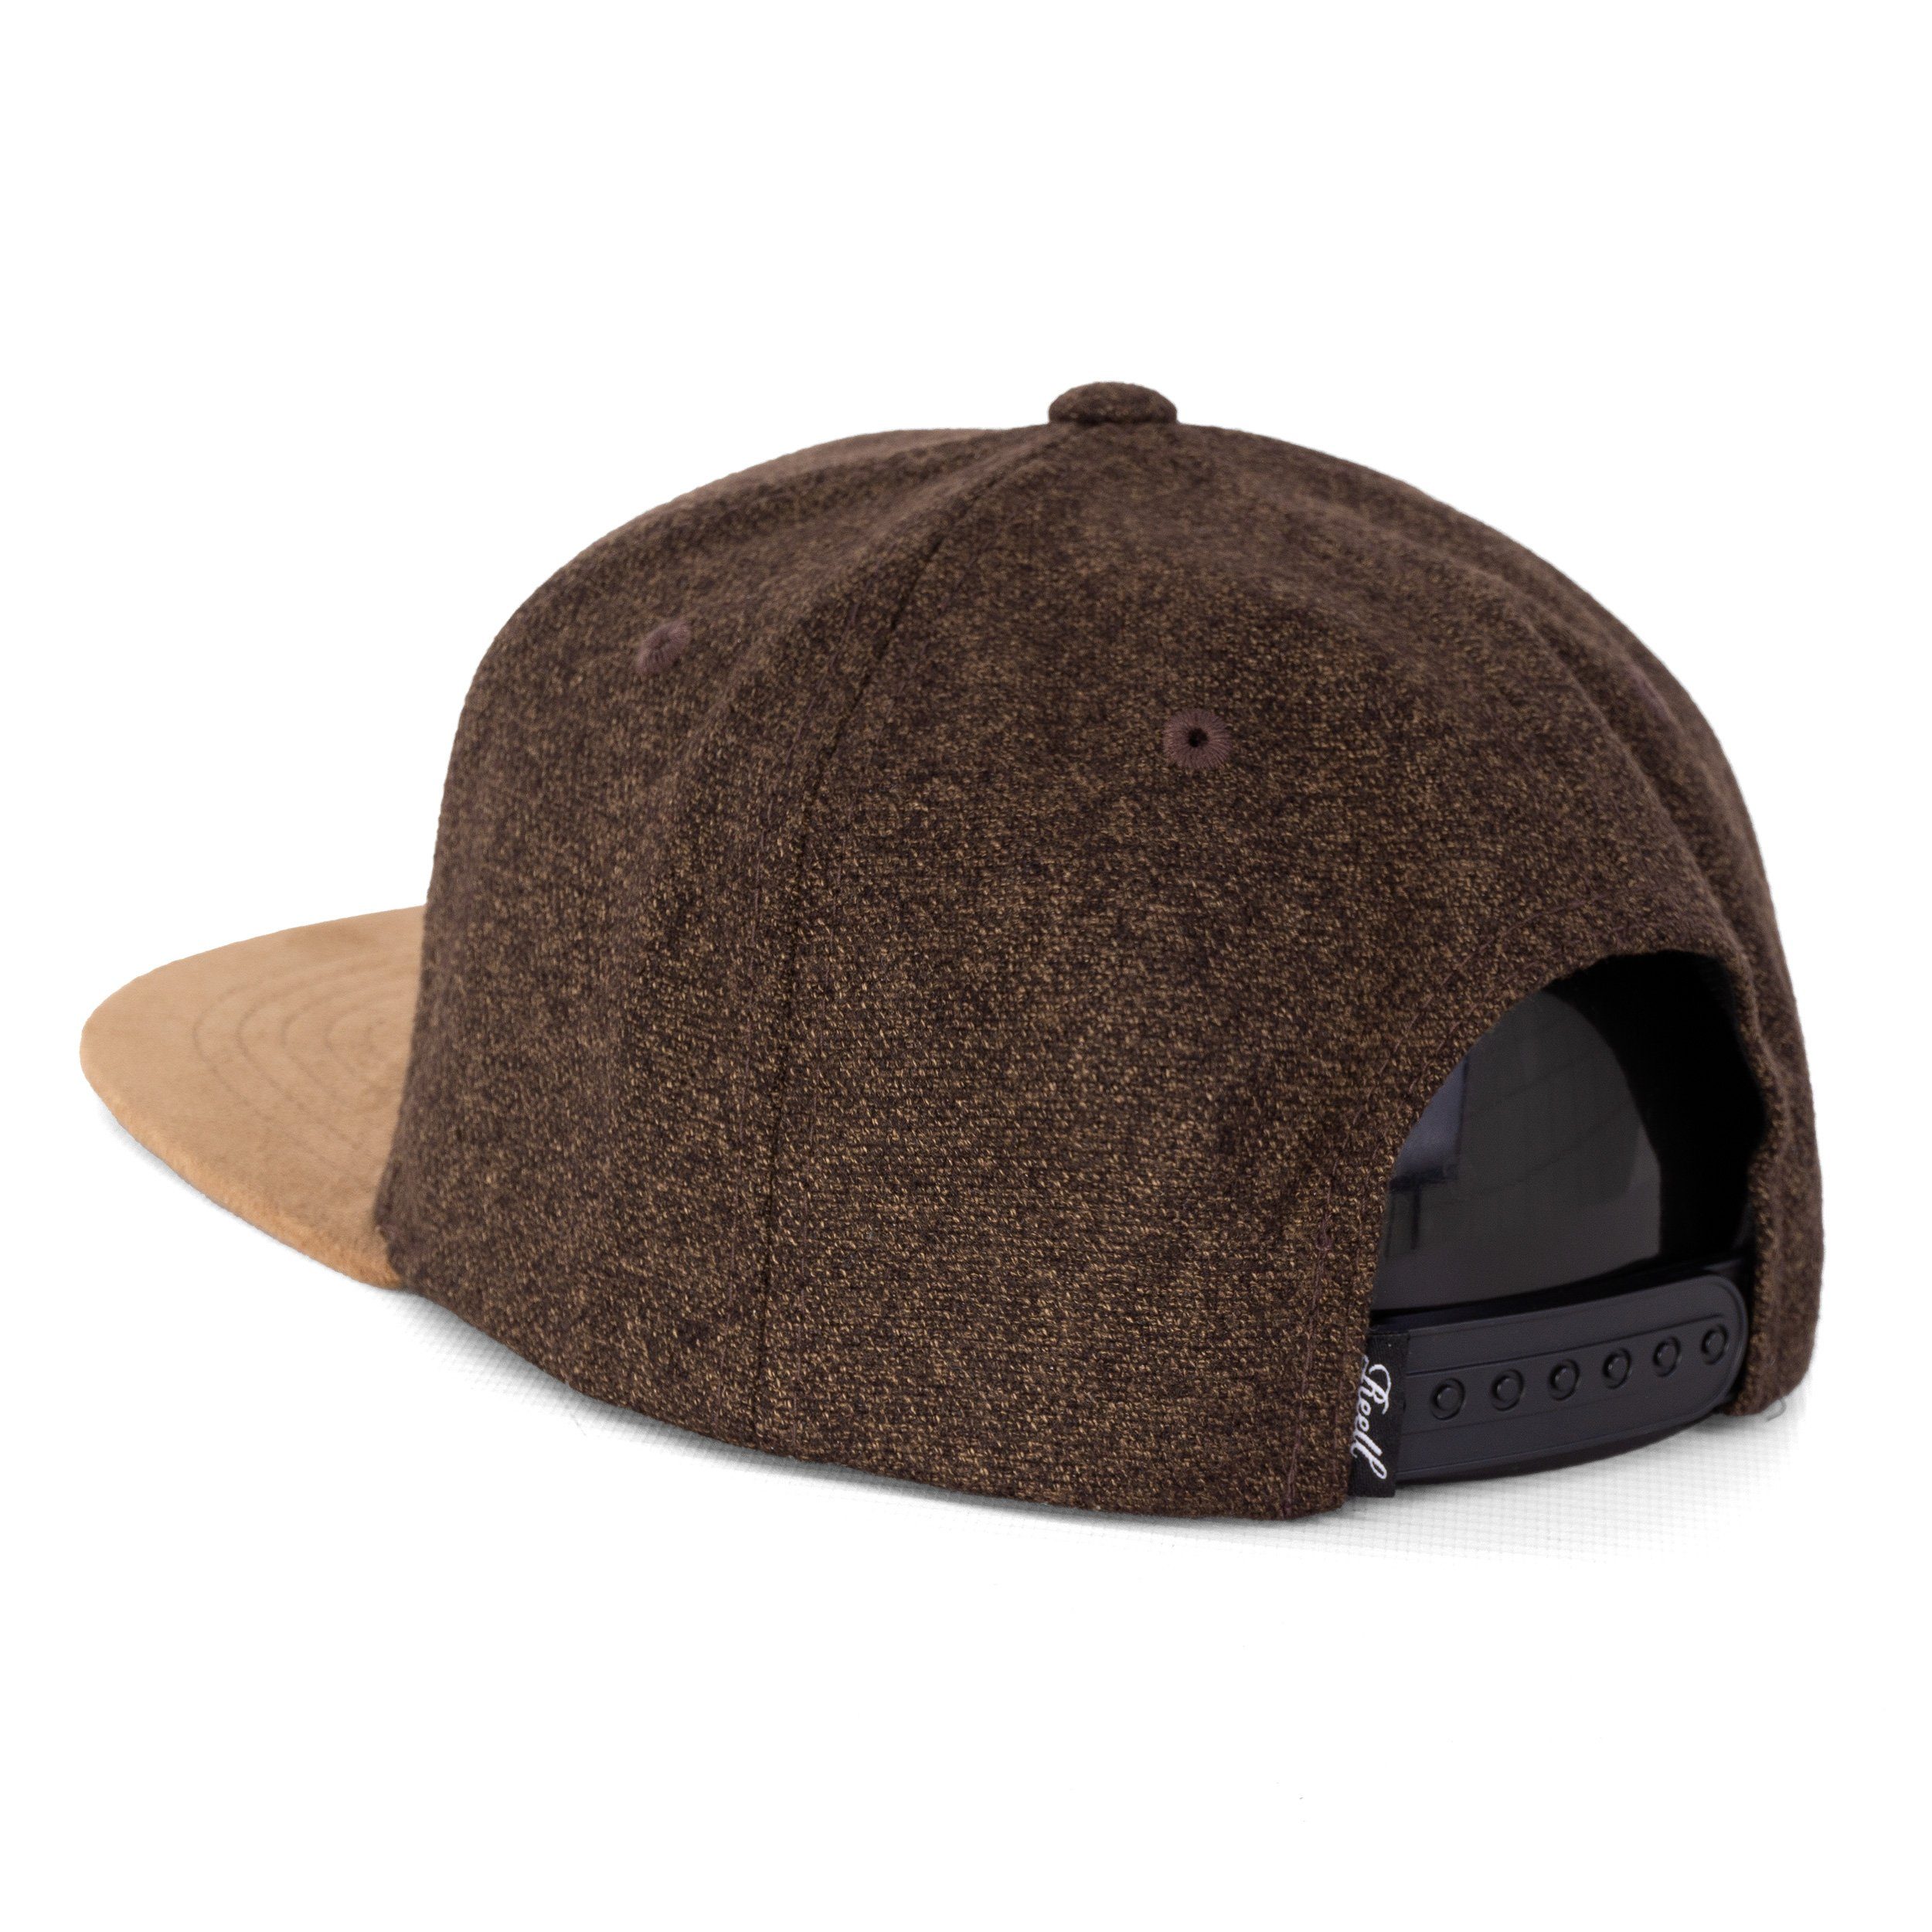 Suede Baseball Cap REELL Cap Reell (1-St) heat.olive